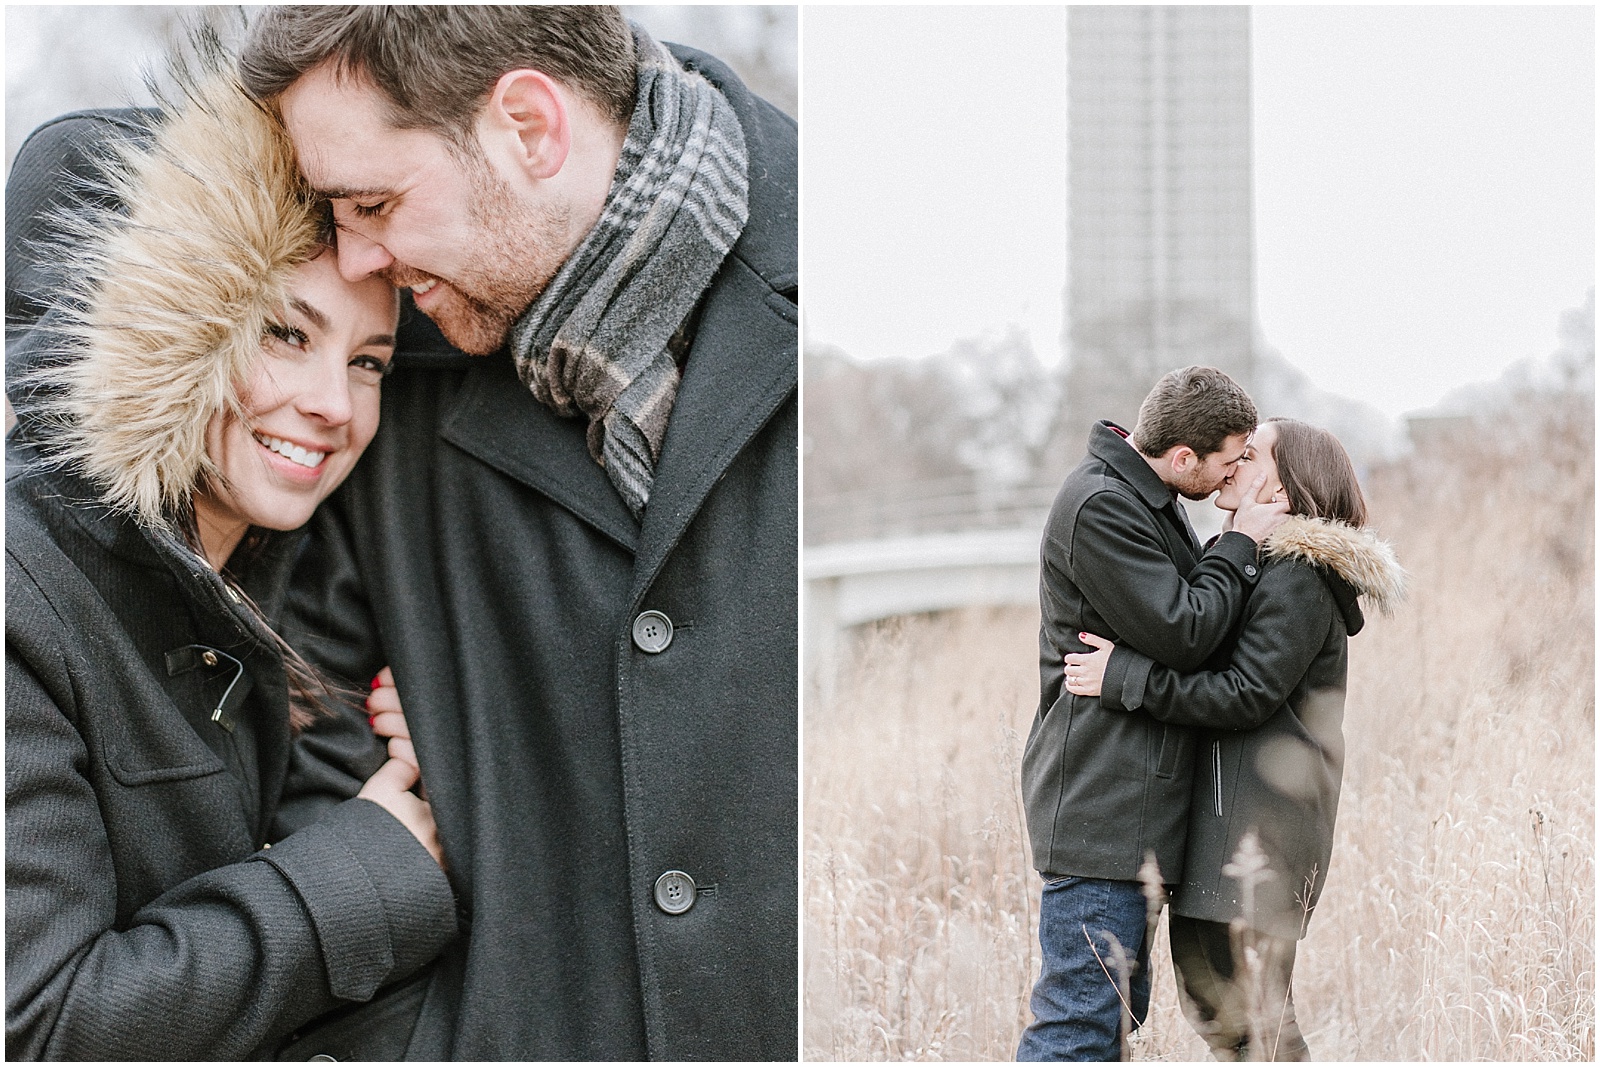 Winter engagement photos with fur coat